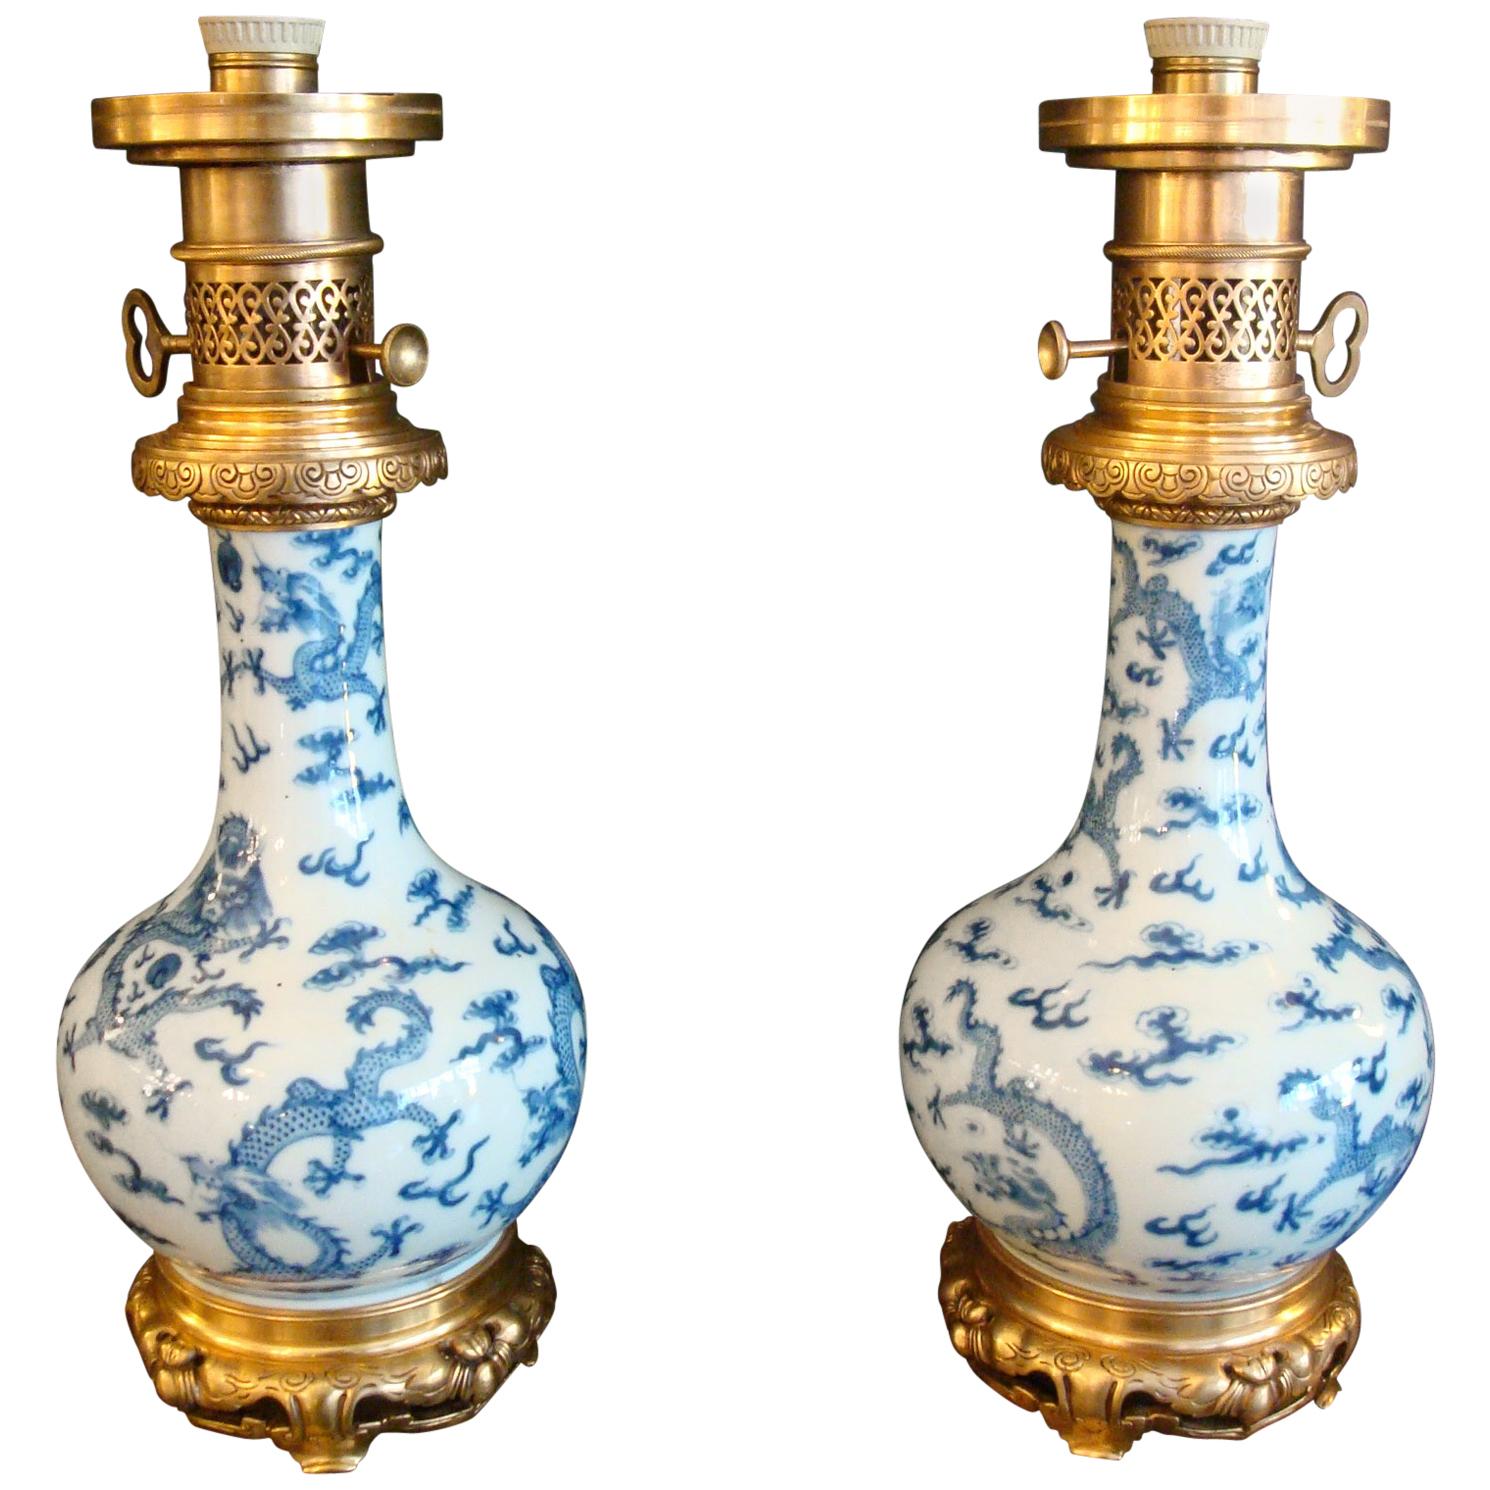 Pair of Ormolu-Mounted Theodore Deck Chinese Dragons Vases as Table Lamps